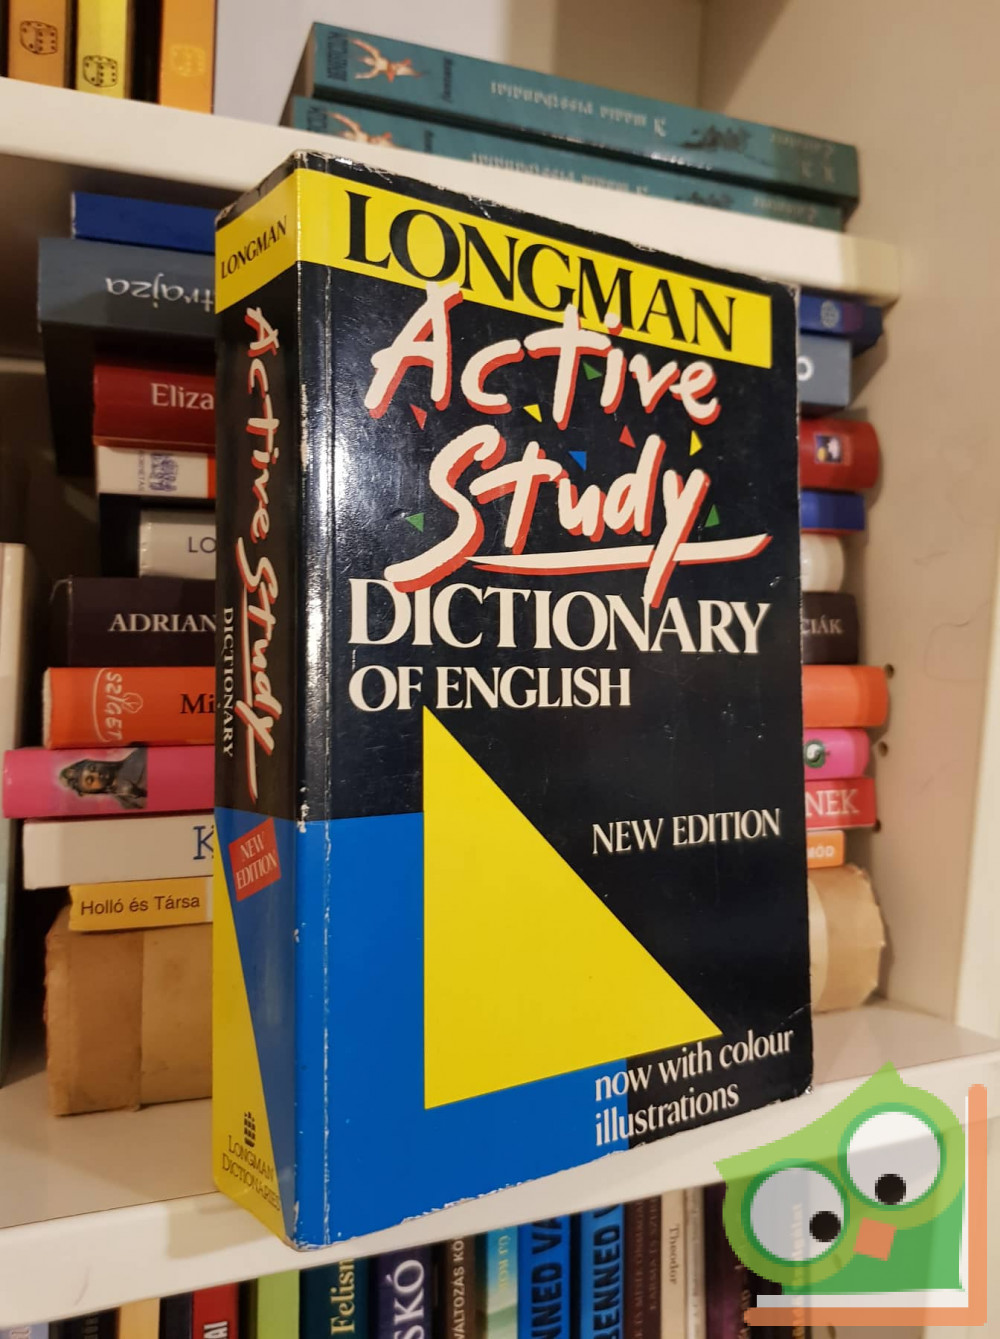 (New　Study　English　Longman　Active　Edition)　Dictionary　of　A